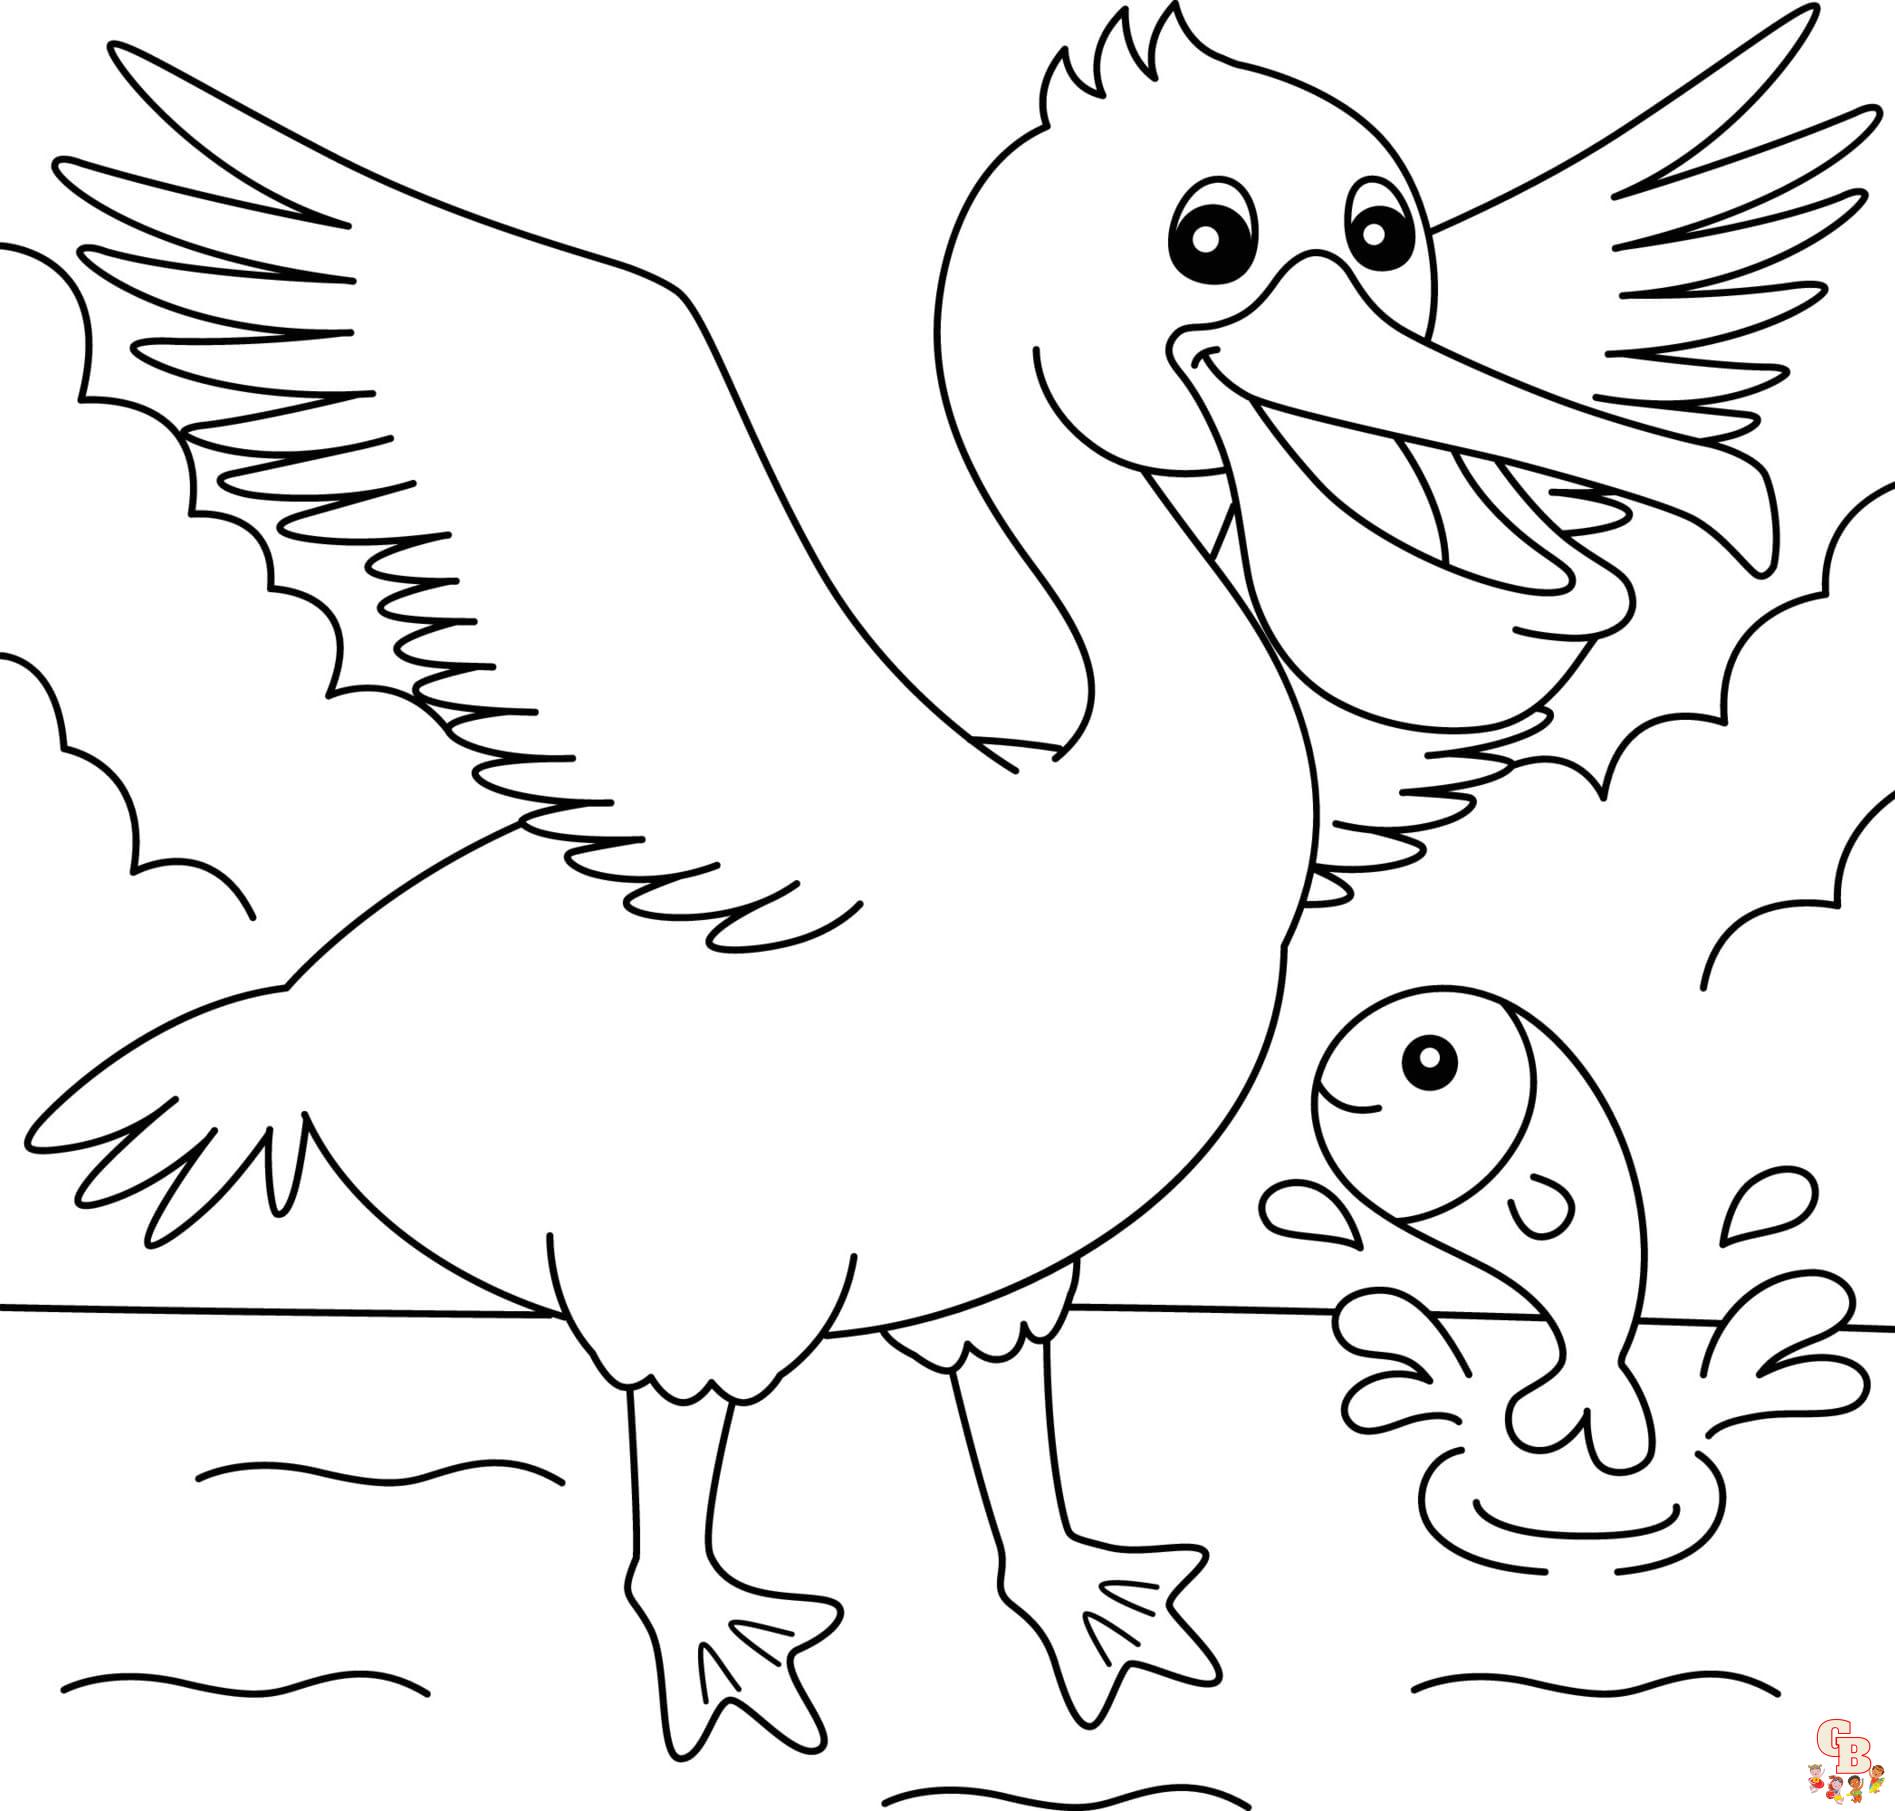 Pelican coloring pages printable free